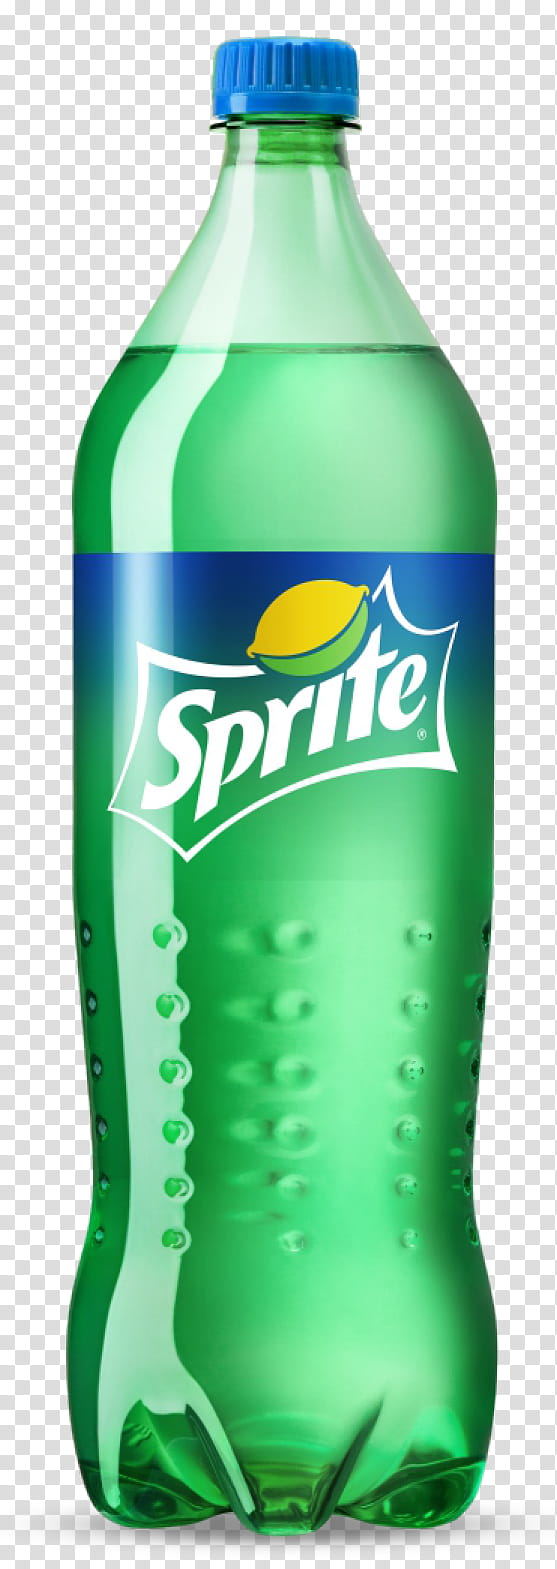 Lemon, Sprite, Fizzy Drinks, Carbonated Water, Panasonic Sprite Fresh 330ml, Carbonated Drink, Mountain Dew, Food transparent background PNG clipart